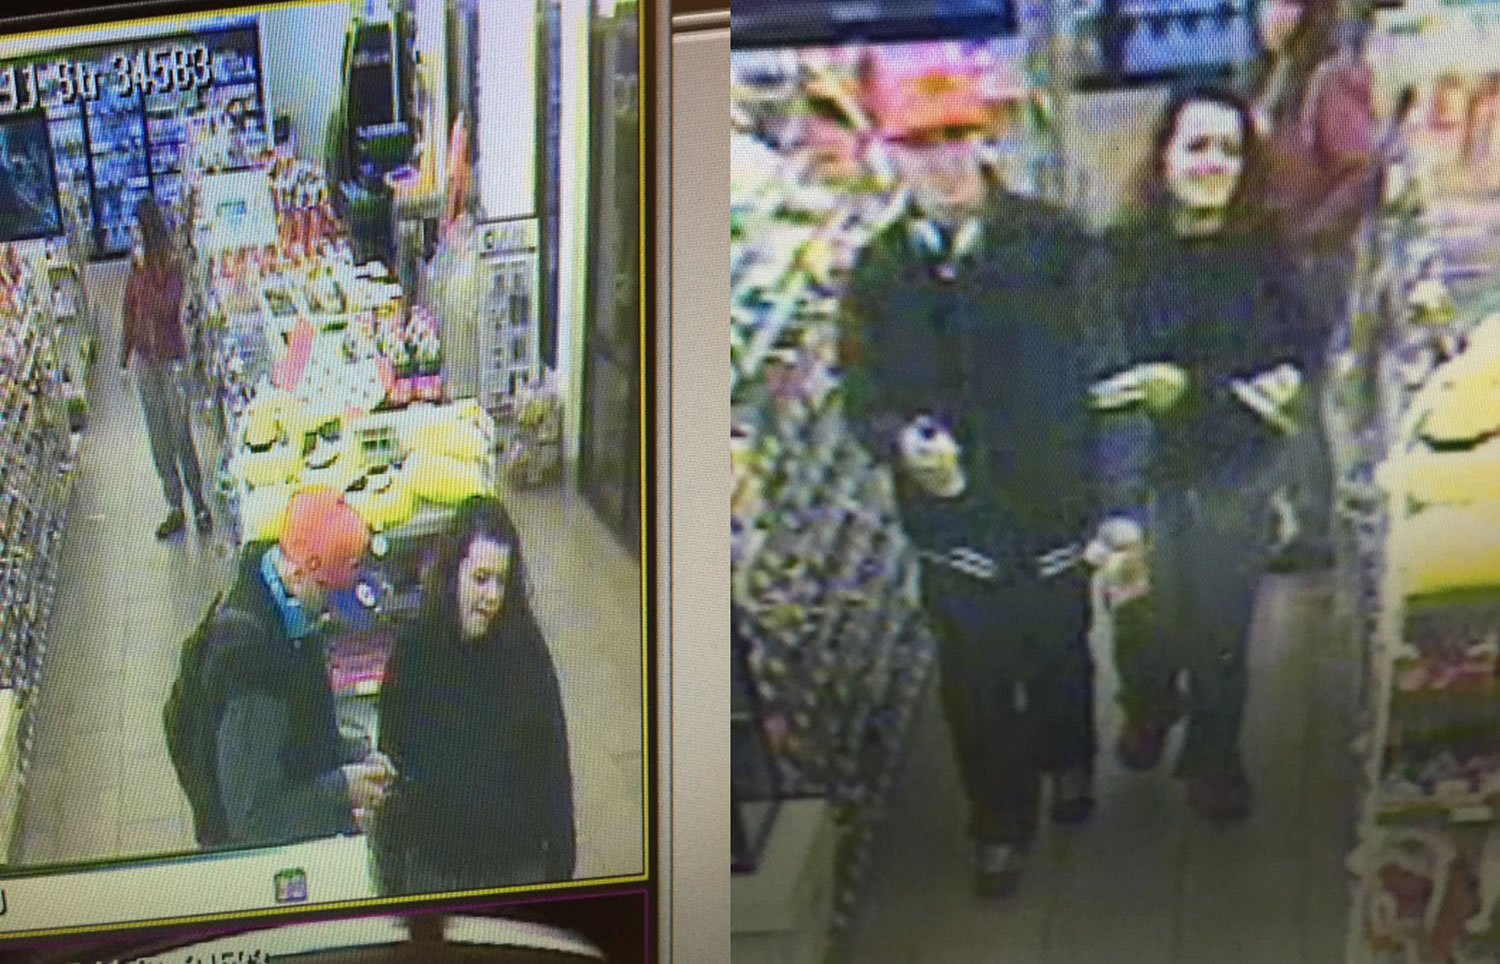 Vancouver police say the male suspect in the surveillance photo pulled a knife on a 7-Eleven clerk Sunday night.